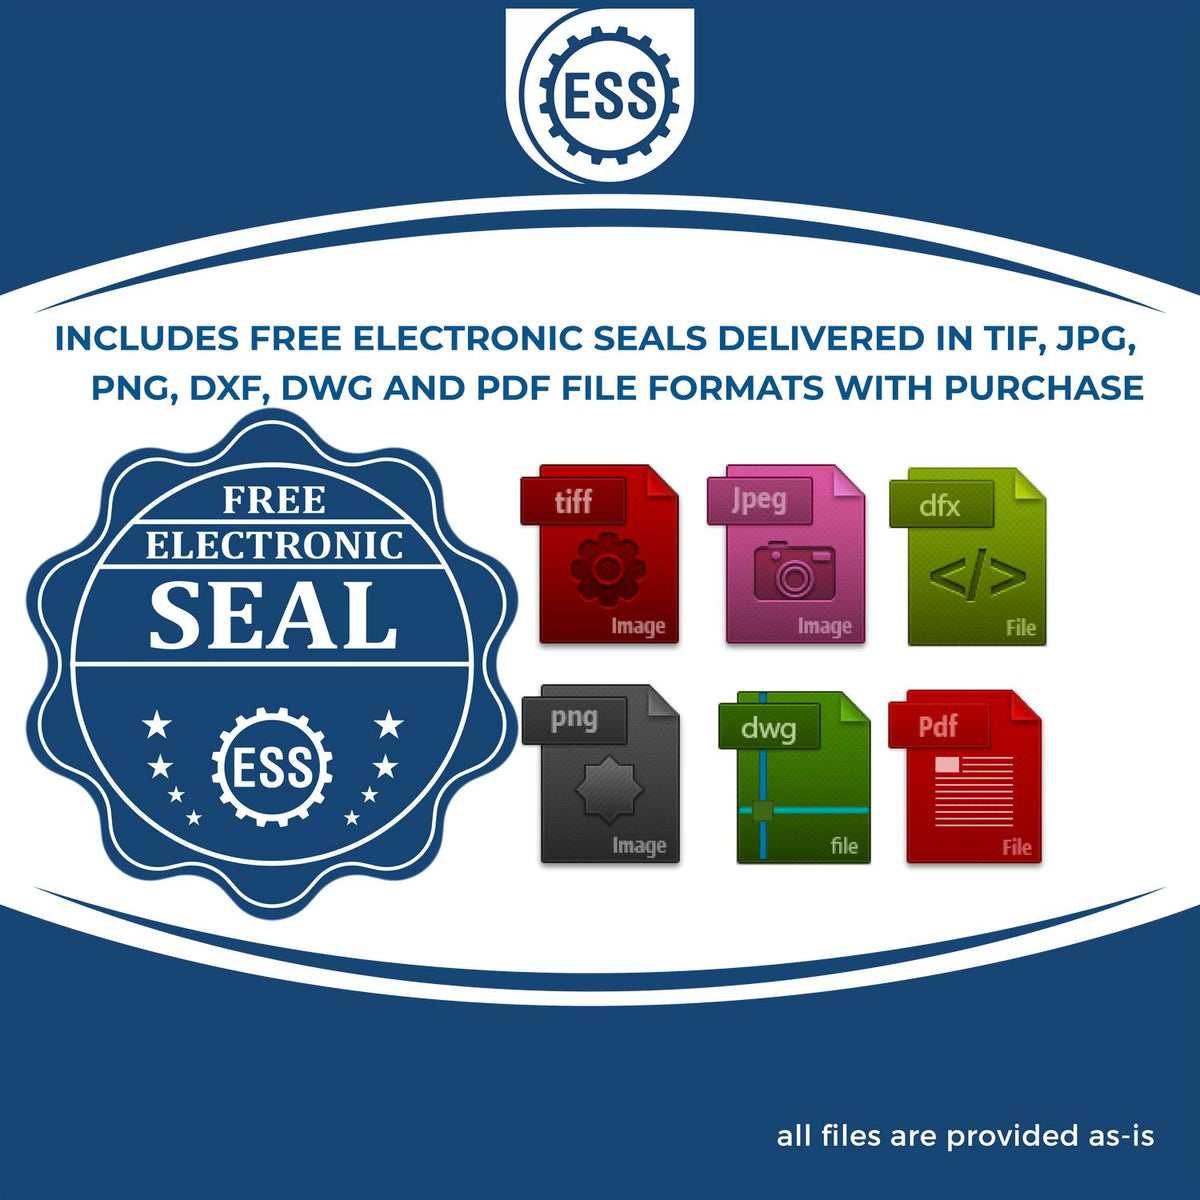 An infographic for the free electronic seal for the Long Reach Ohio PE Seal illustrating the different file type icons such as DXF, DWG, TIF, JPG and PNG.